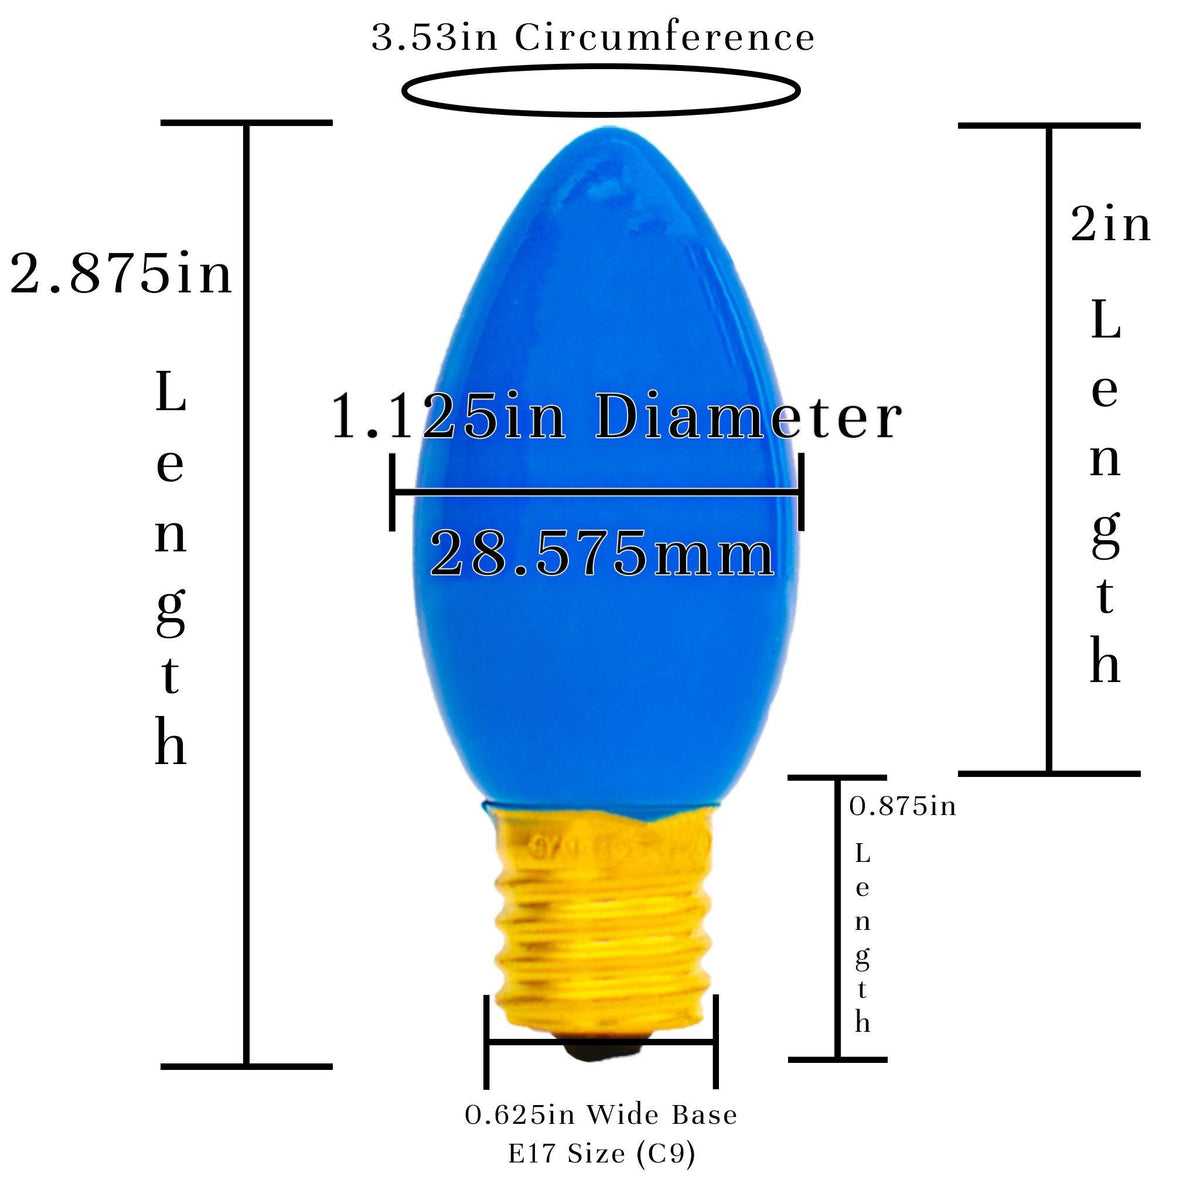 The size of a C9 Candelabra Light Bulb